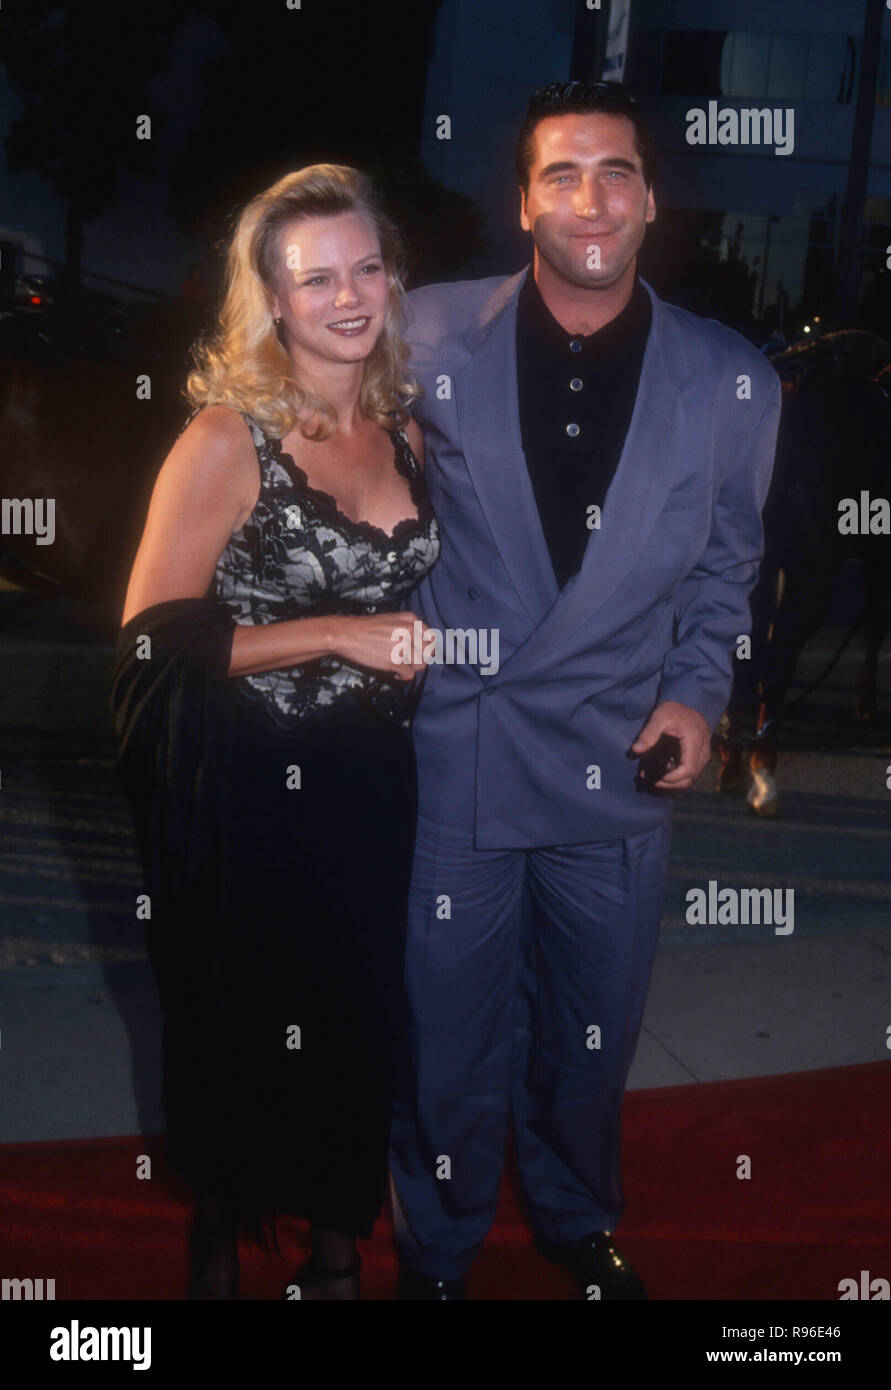 HOLLYWOOD, CA - MAY 12: Actor Daniel Baldwin and wife Elizabeth Baldwin attend the 'Posse' Premiere on May 12,1993 at the Cinerama Dome in Hollywood, California. Photo by Barry King/Alamy Stock Photo Stock Photo